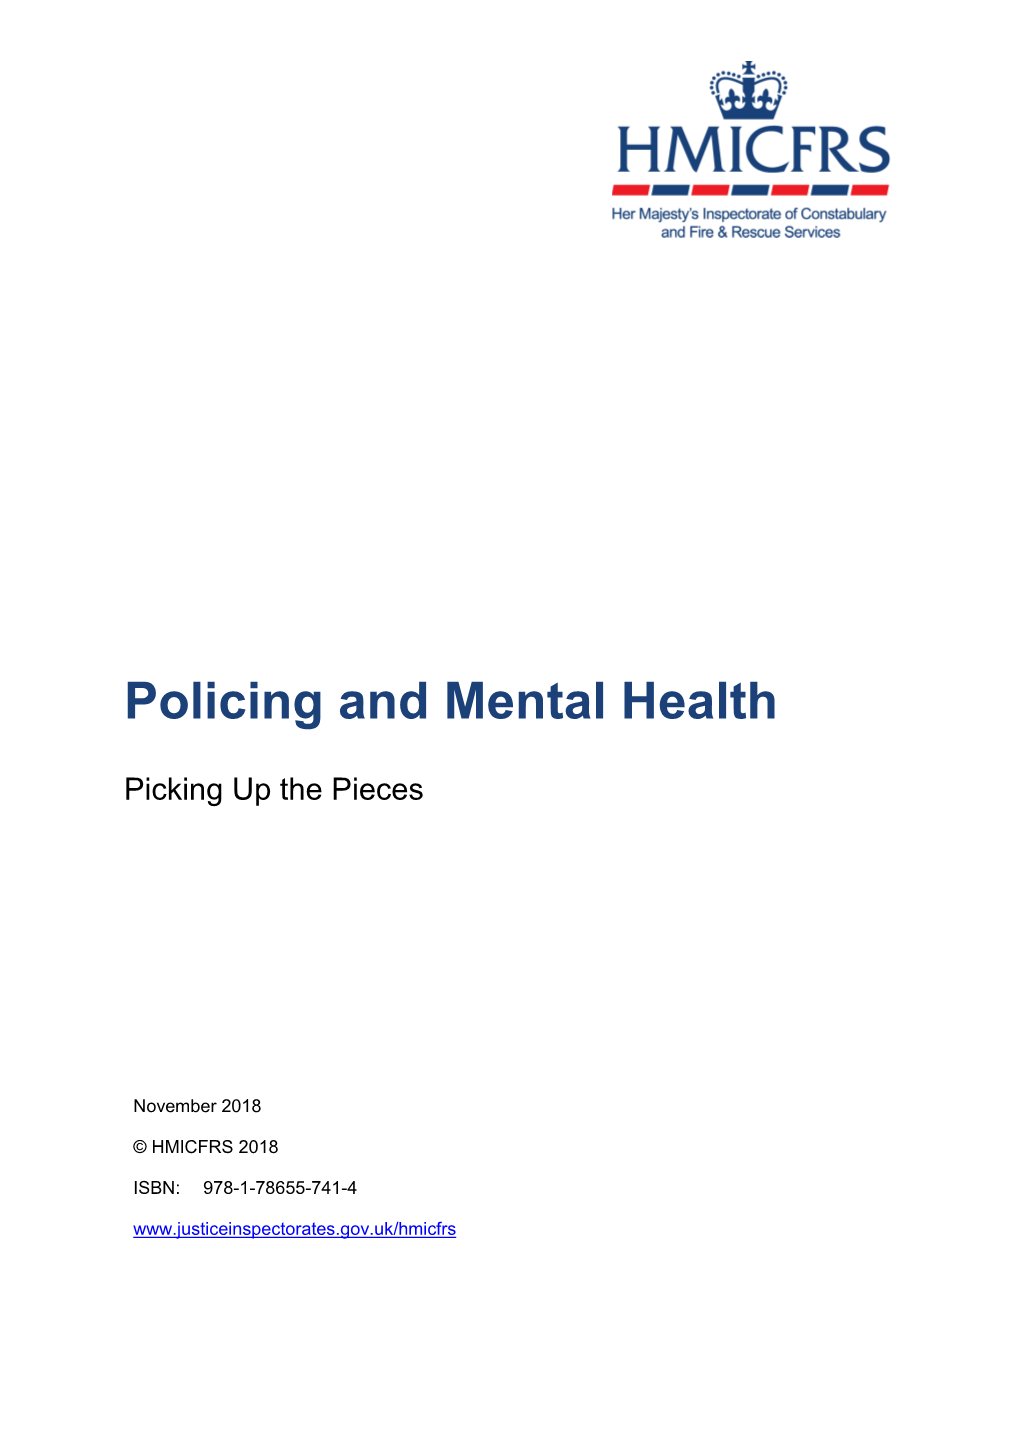 Policing and Mental Health: Picking up the Pieces